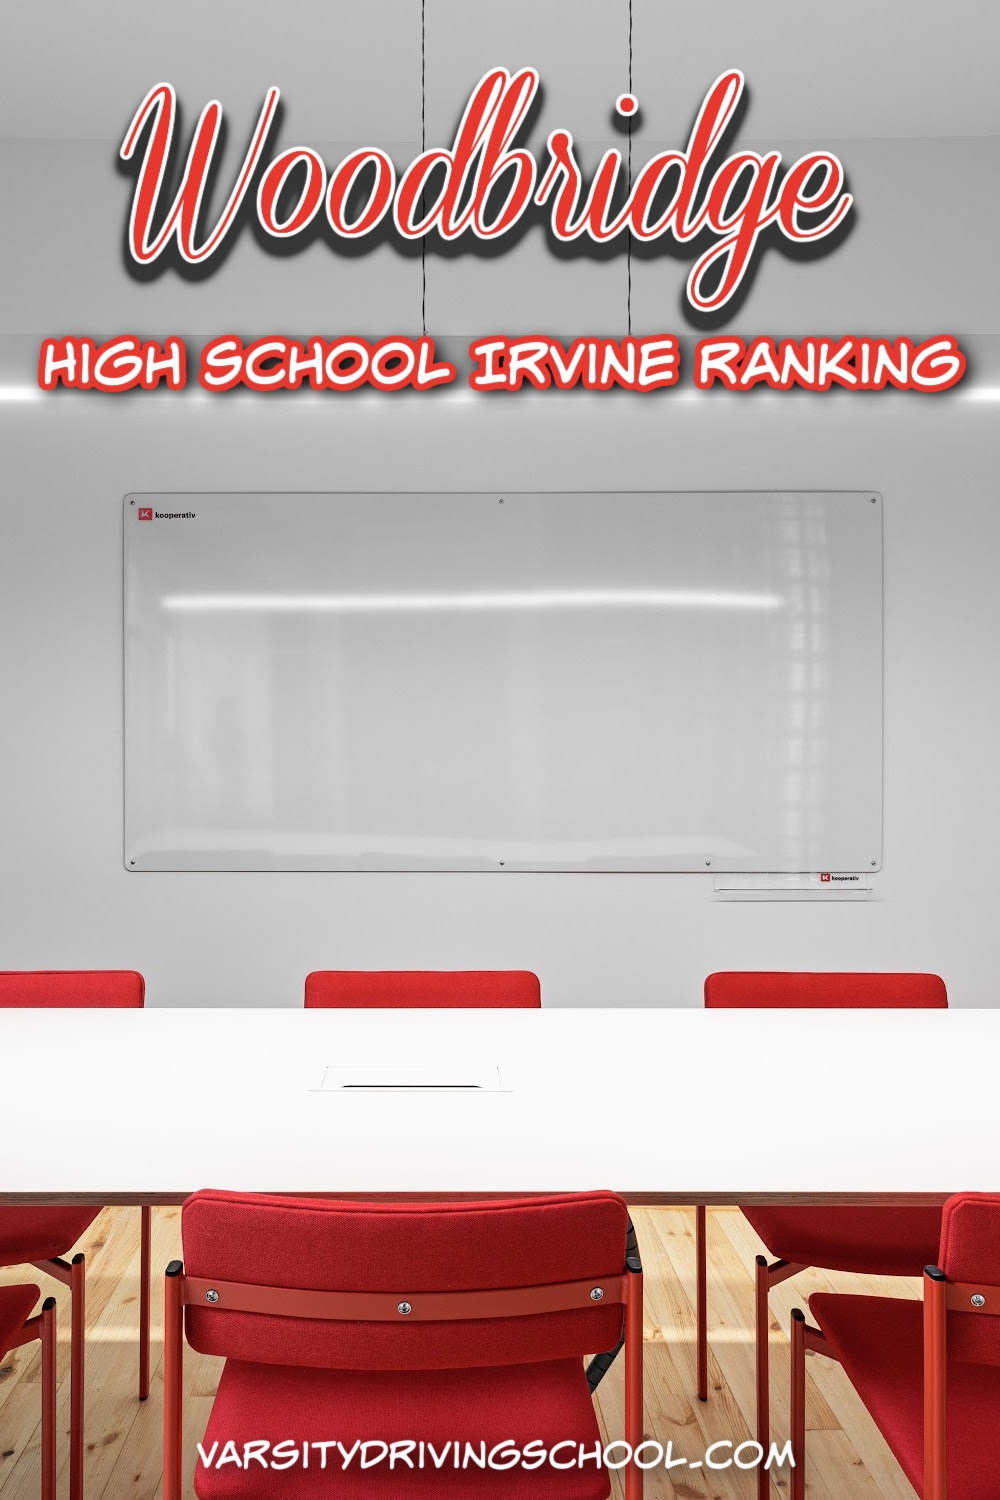 The Woodbridge High School Irvine ranking information to know can help parents and students make more informed decisions.